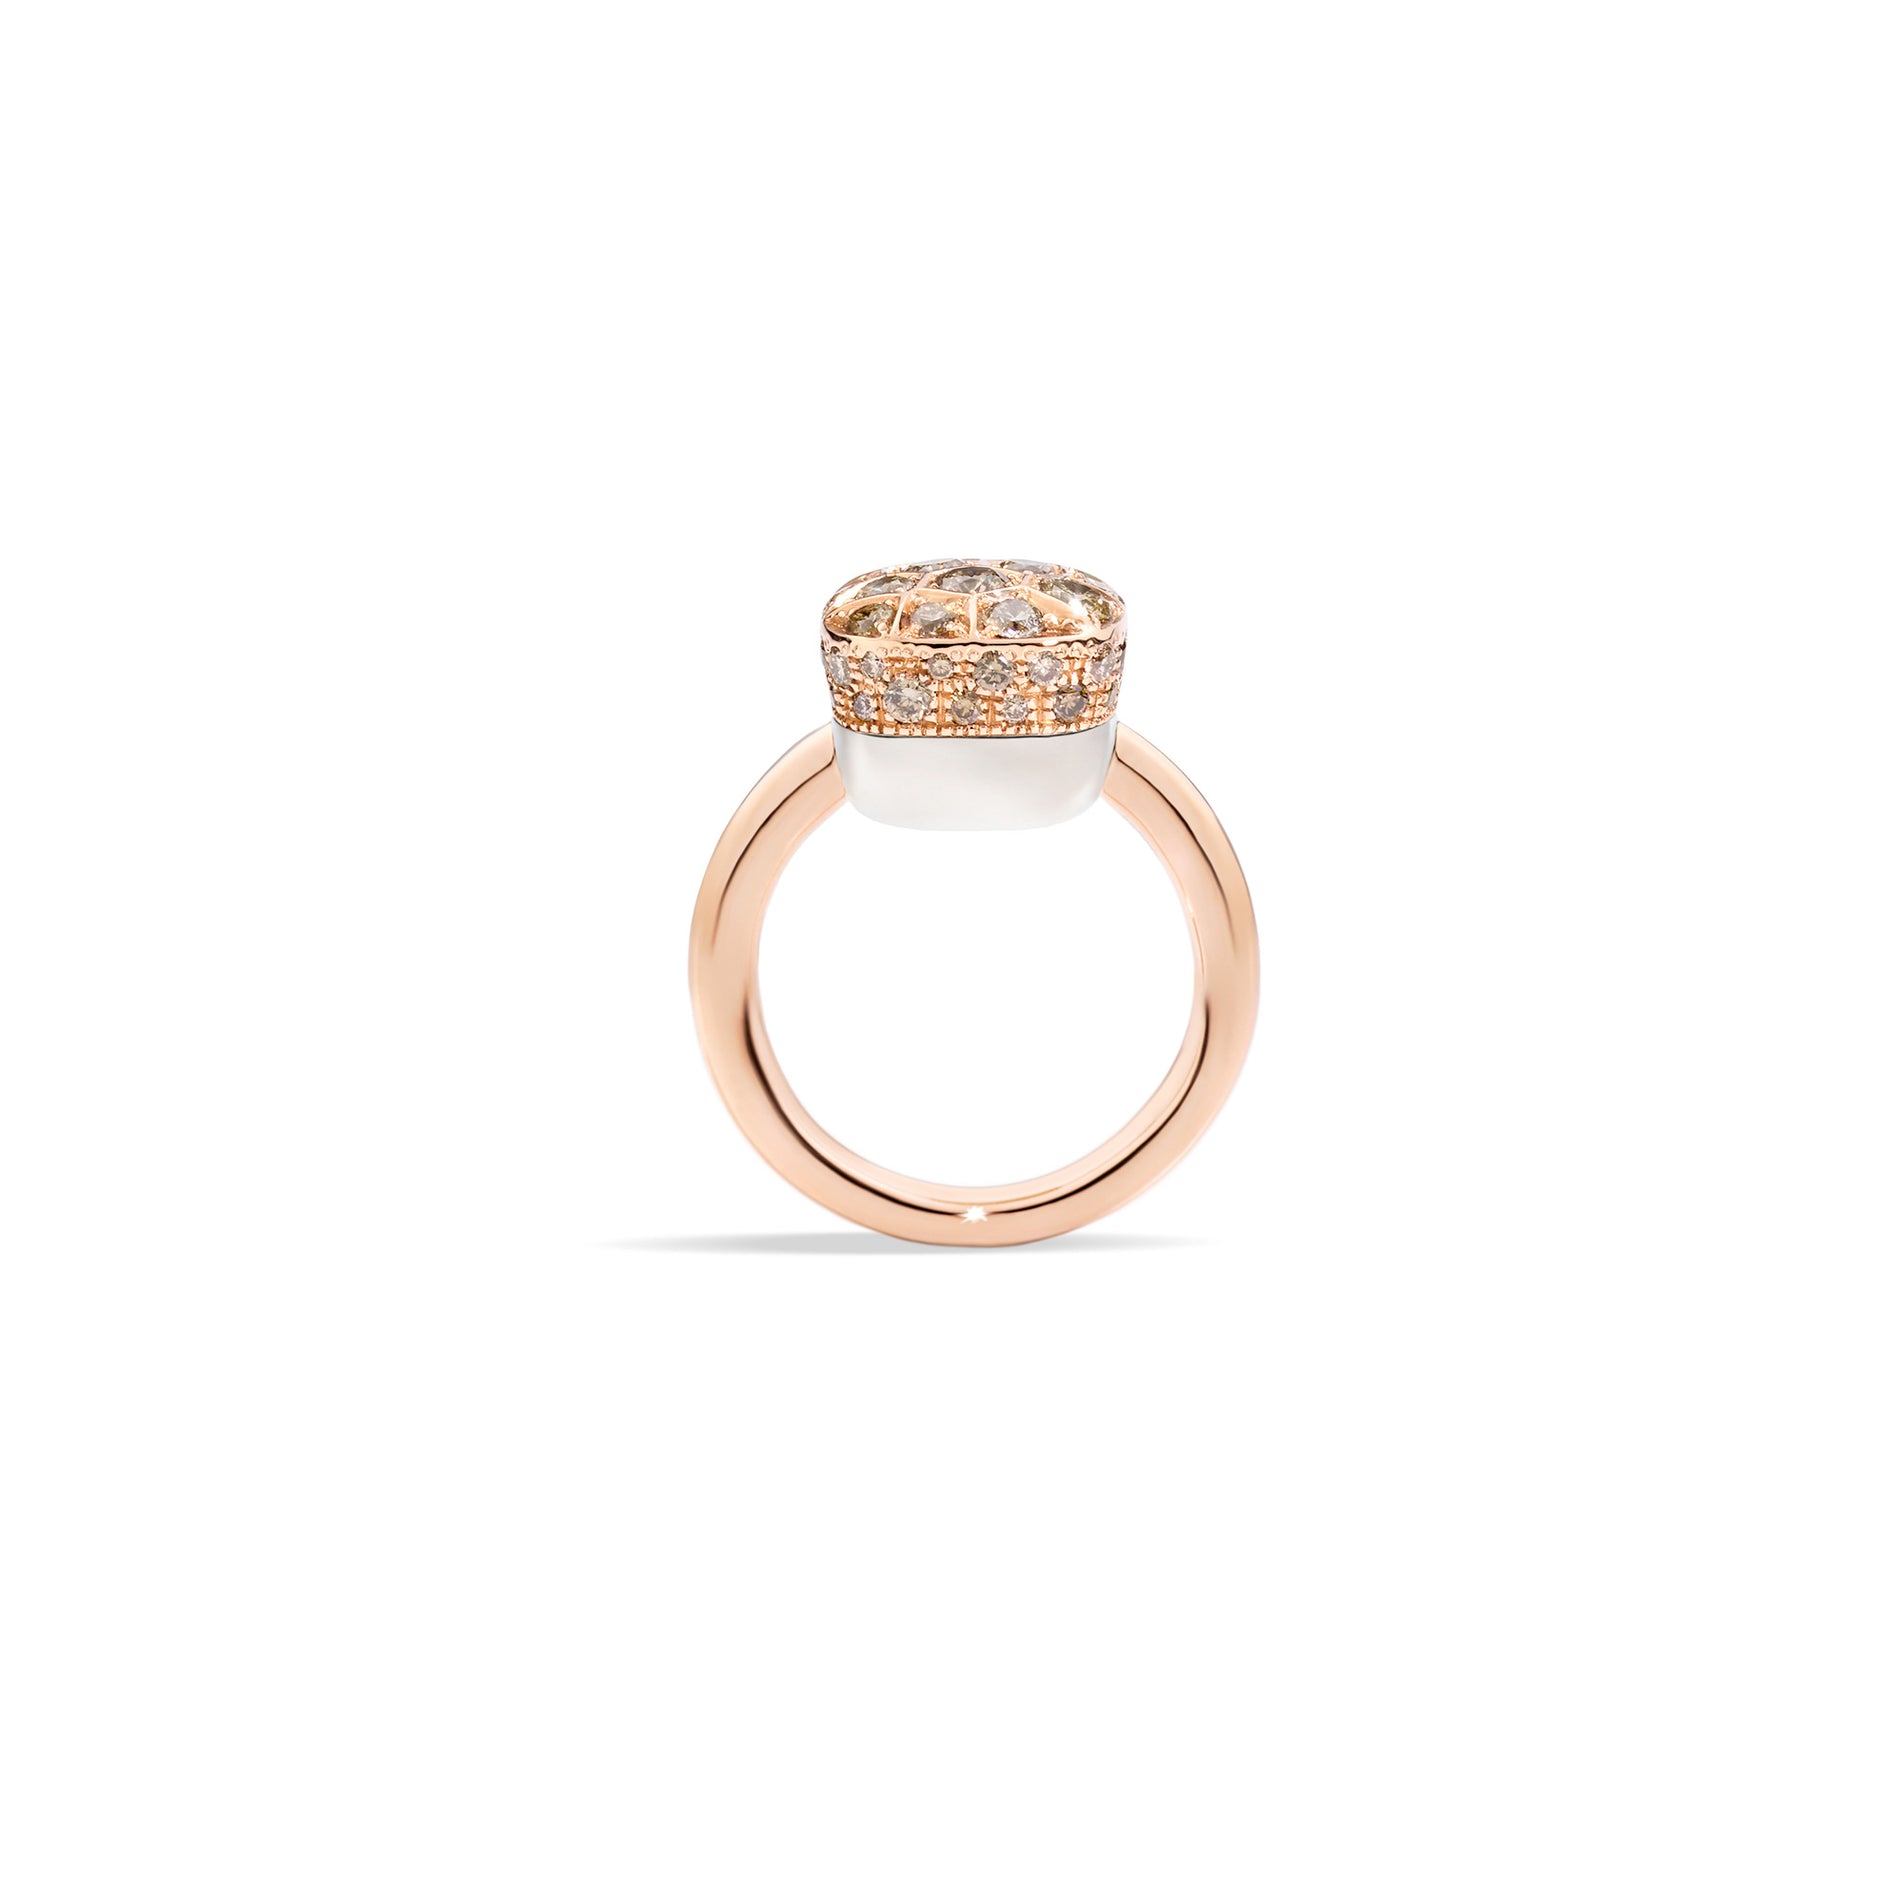 Nudo Maxi Ring in 18k Rose Gold and White Gold with Brown Diamonds - Orsini Jewellers NZ